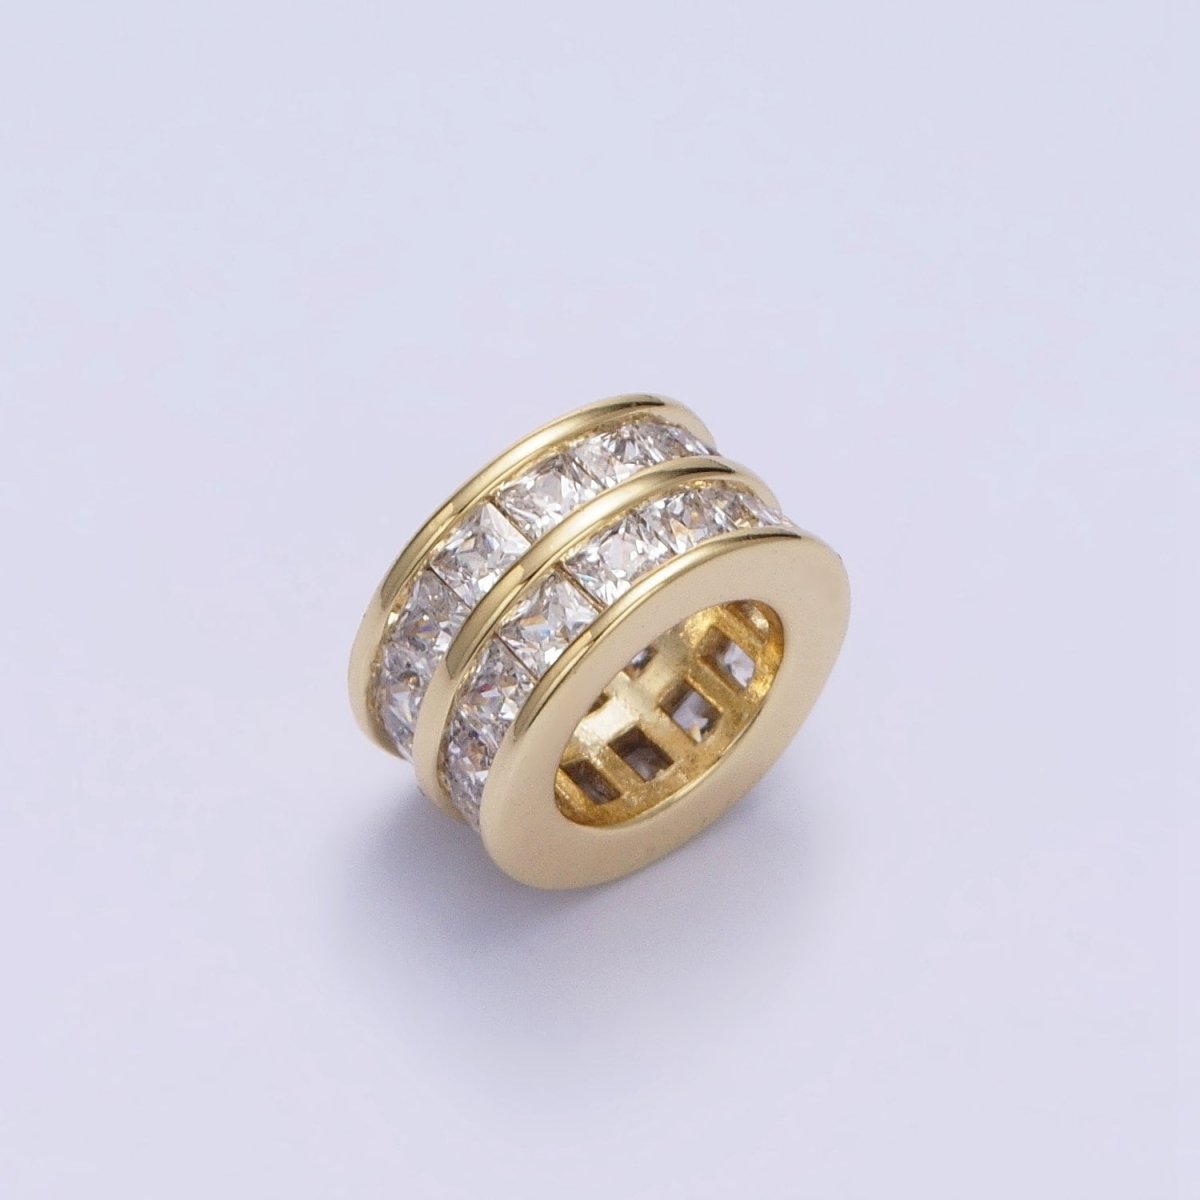 1pc Gold Filled Cylinder Beads, CZ Large Hole Cylinder Drum Barrel Micro Pave Beads, Tube CZ Beads, Large Hole Spacer Bead 10.7mm B-815 - DLUXCA